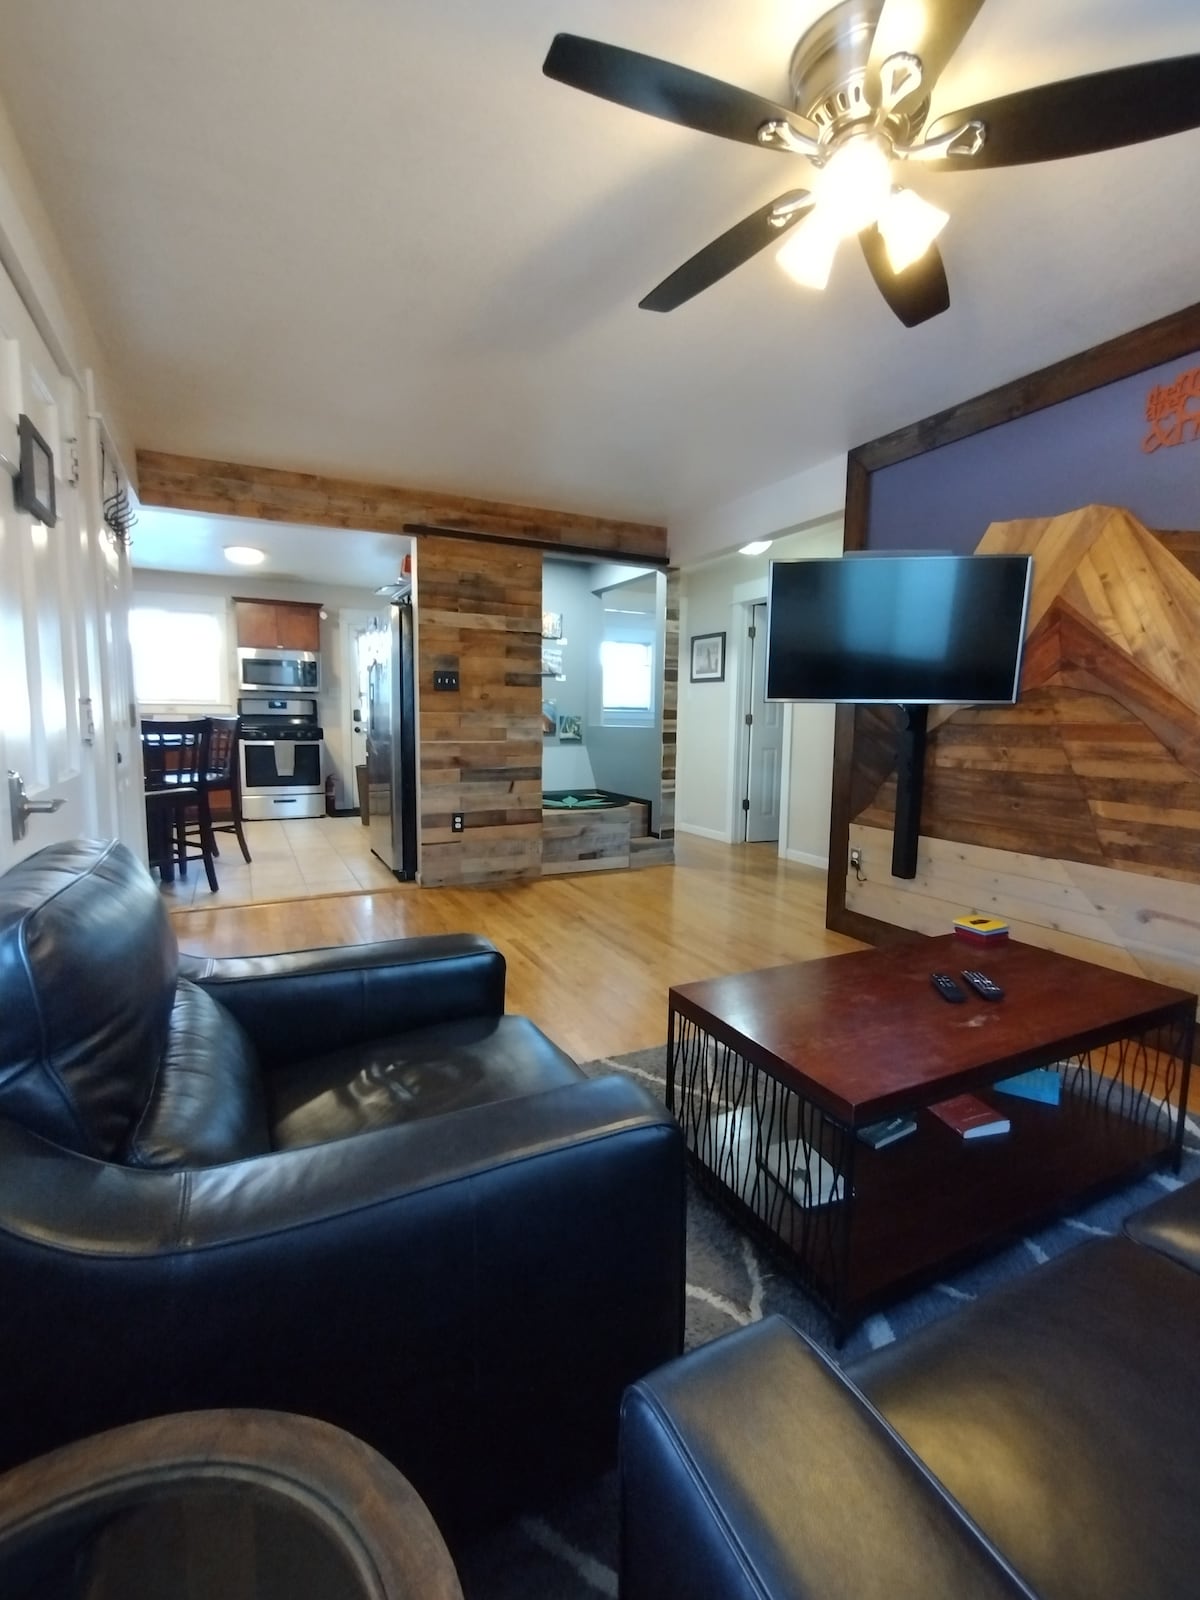 Cannabis Friendly BnB Minutes From Downtown Denver